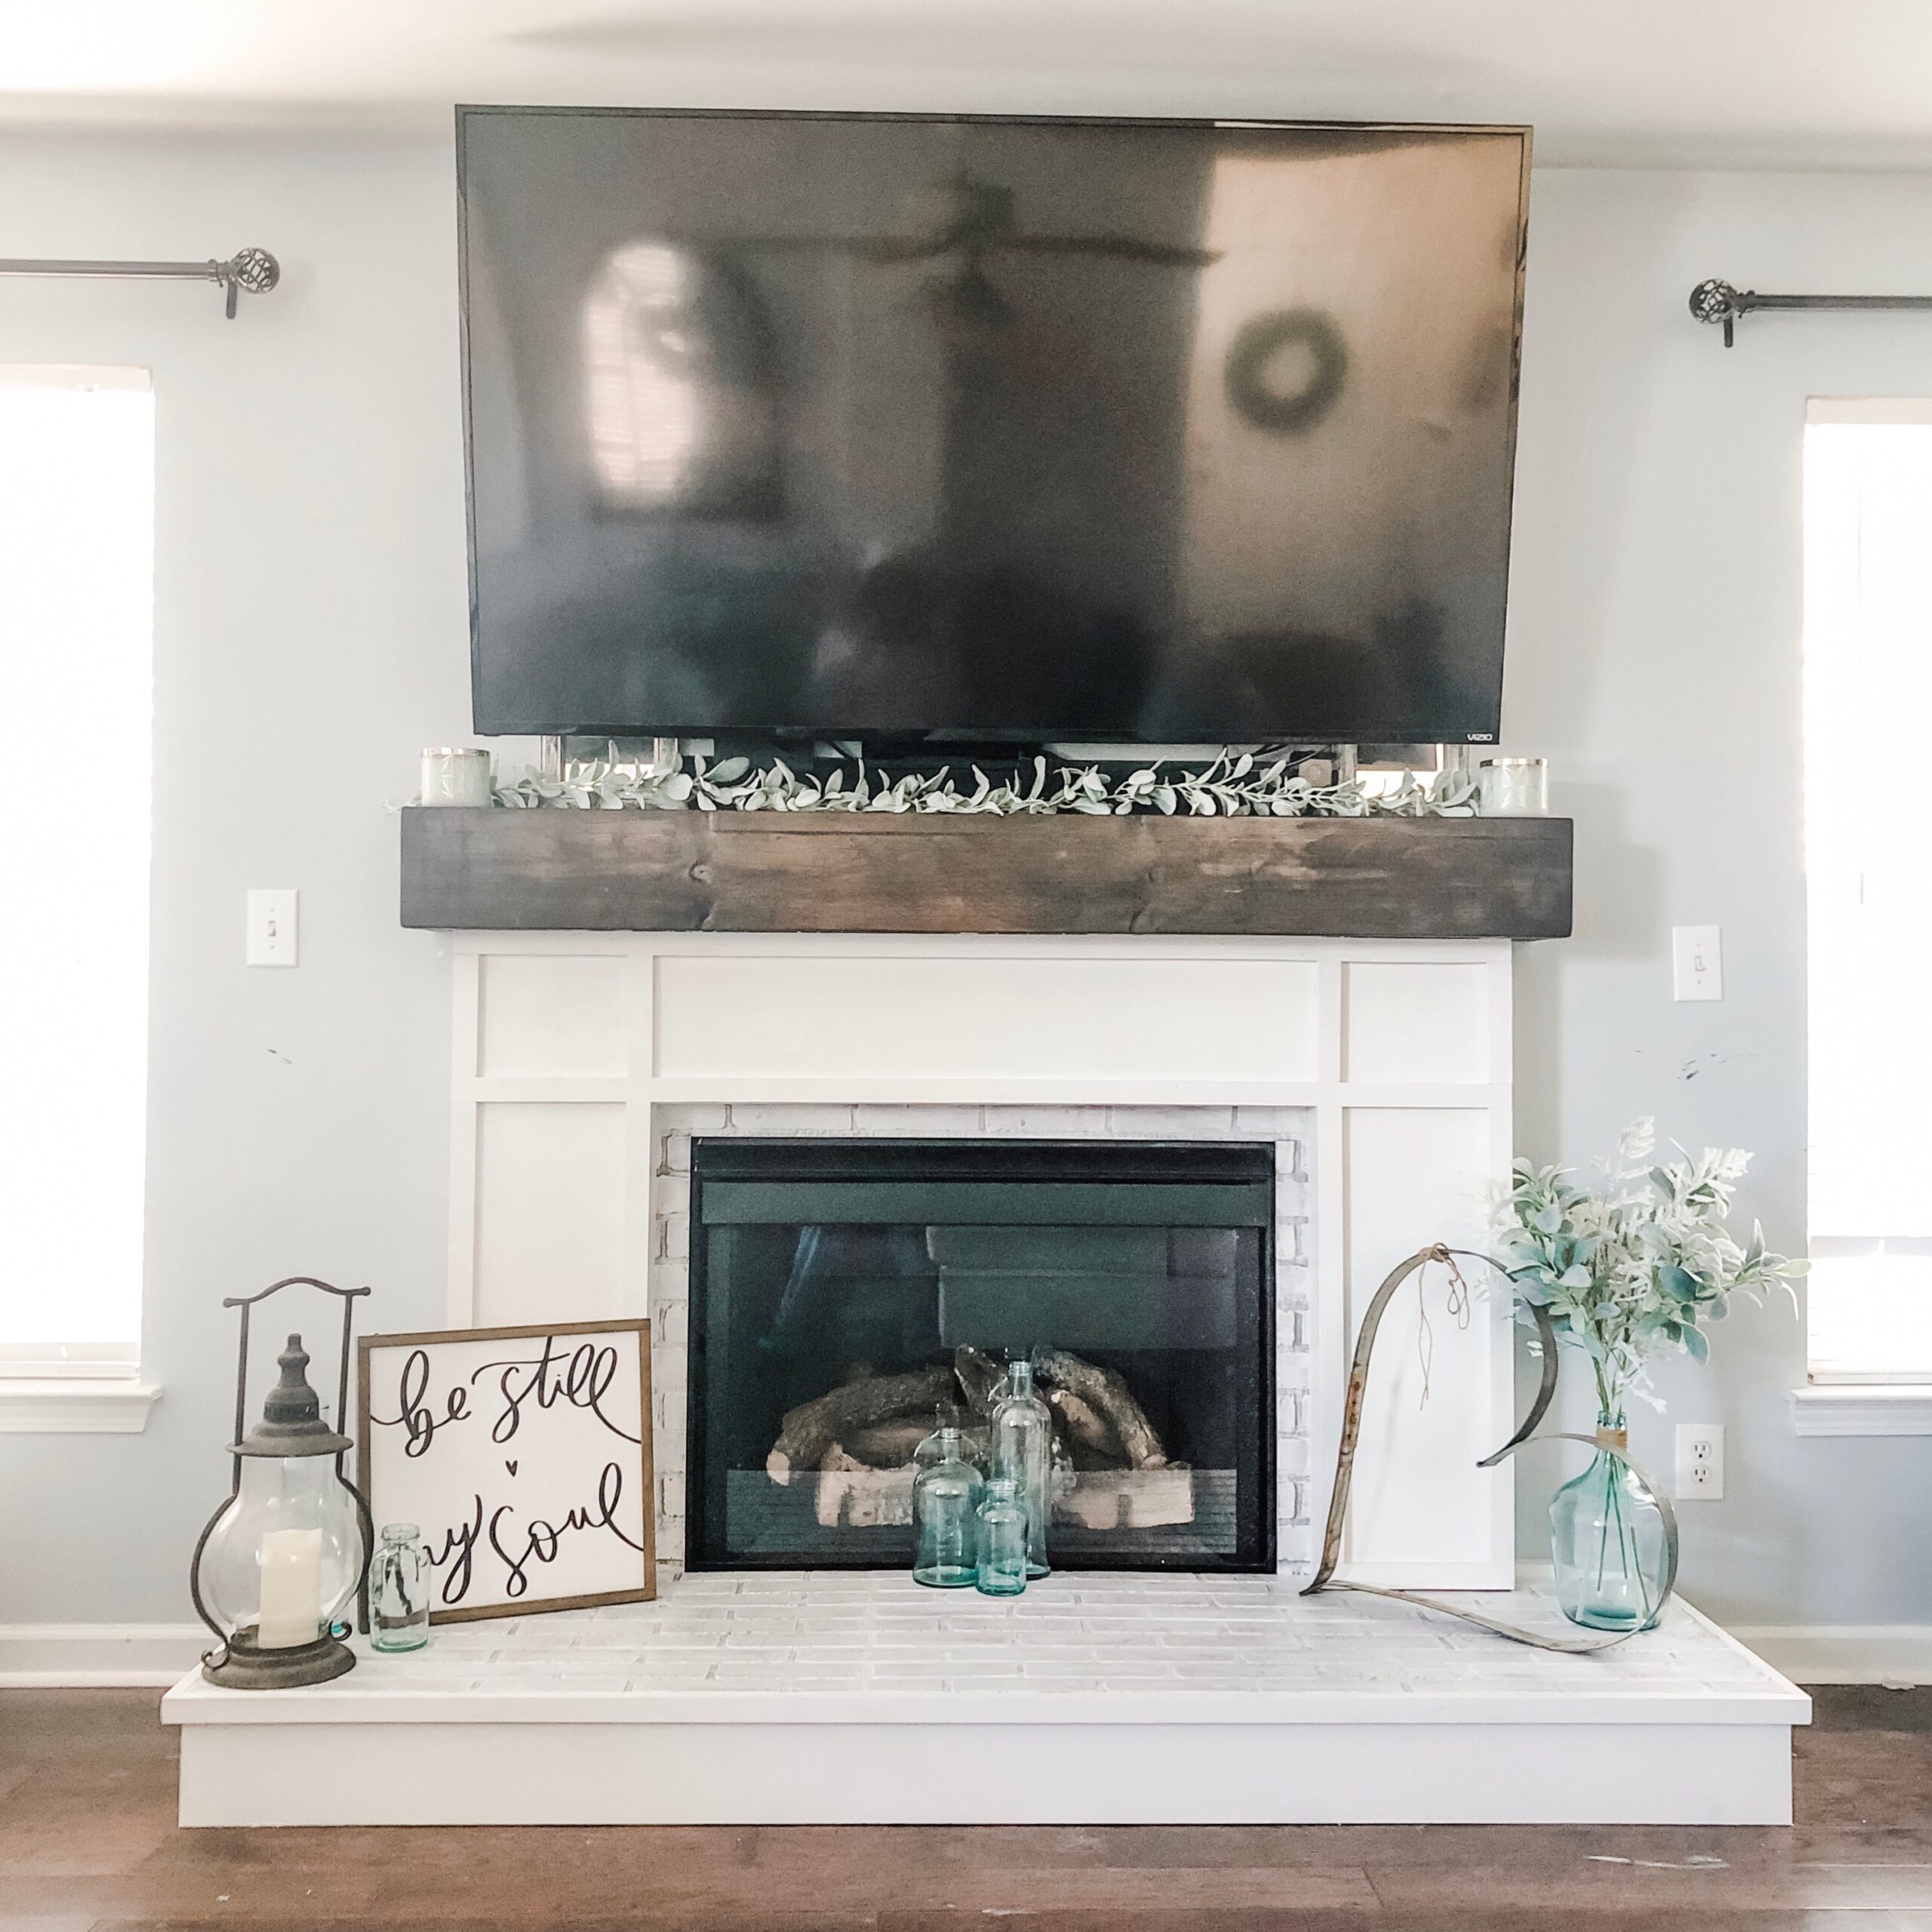 How To: Build Fireplace Cover with Hearth